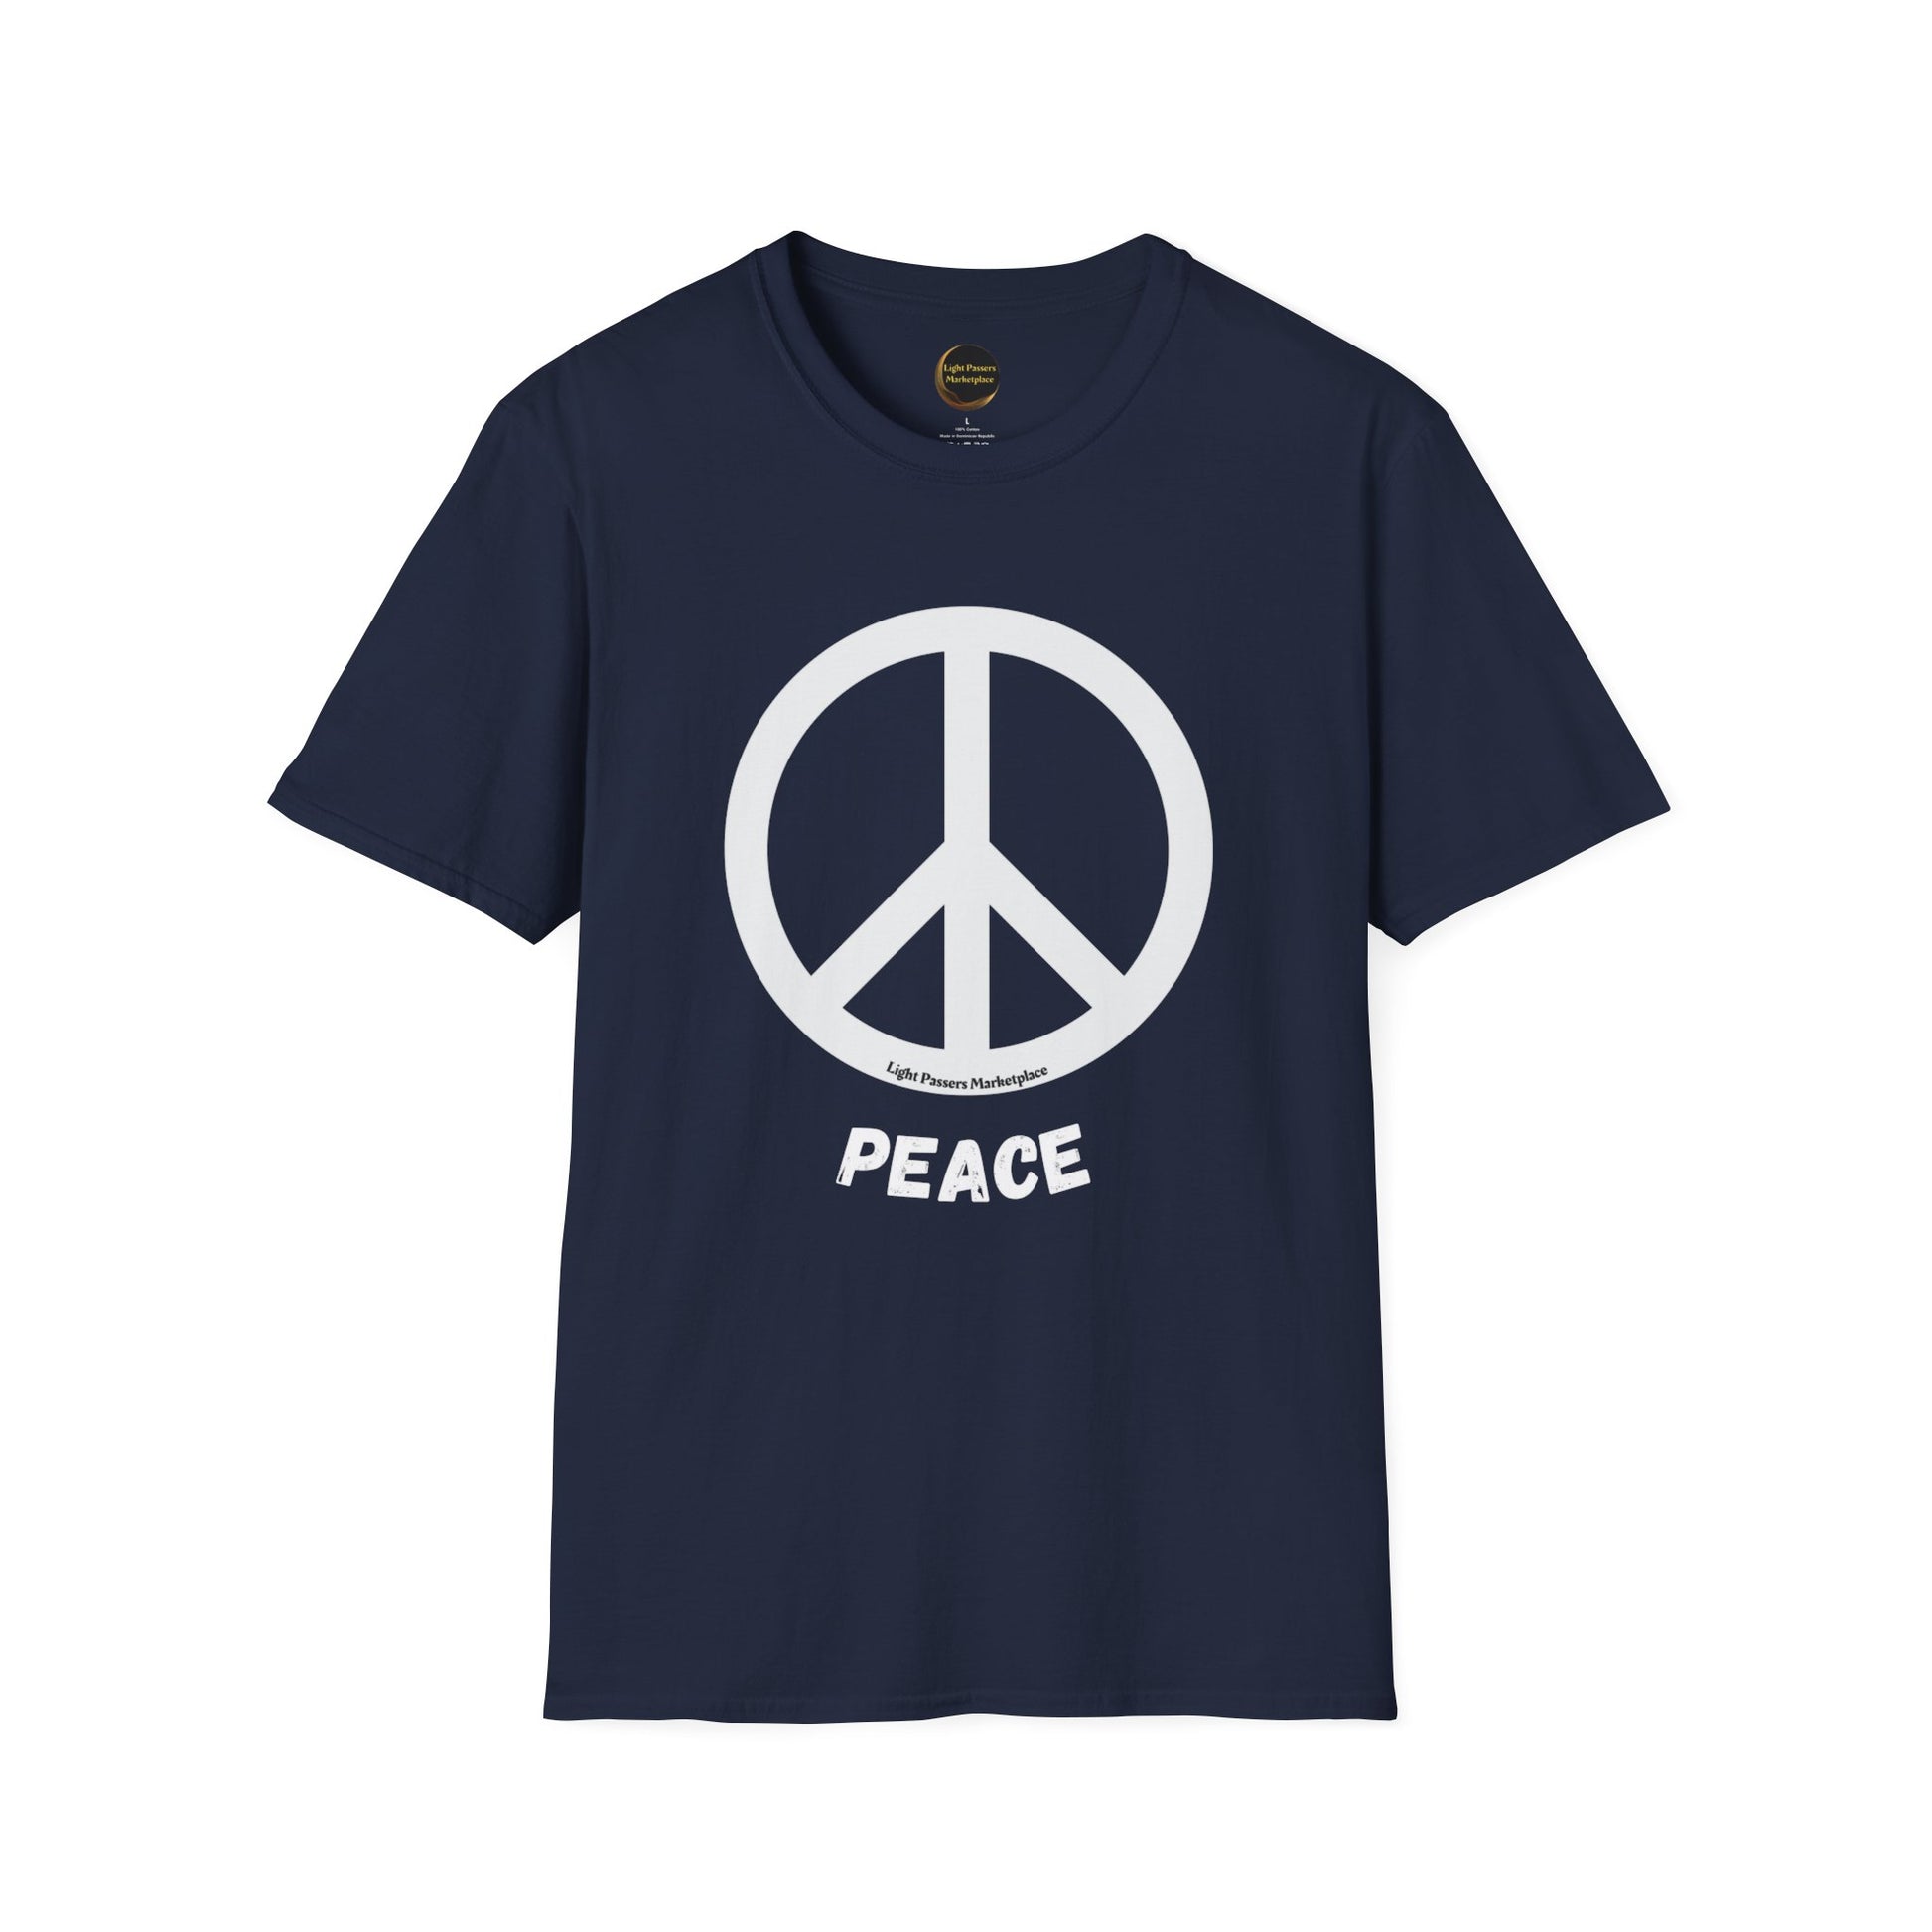 A blue unisex t-shirt featuring a peace symbol, made of soft 100% ring-spun cotton with twill tape shoulders for durability and a ribbed collar. Ethically sourced and tear-away label for comfort.